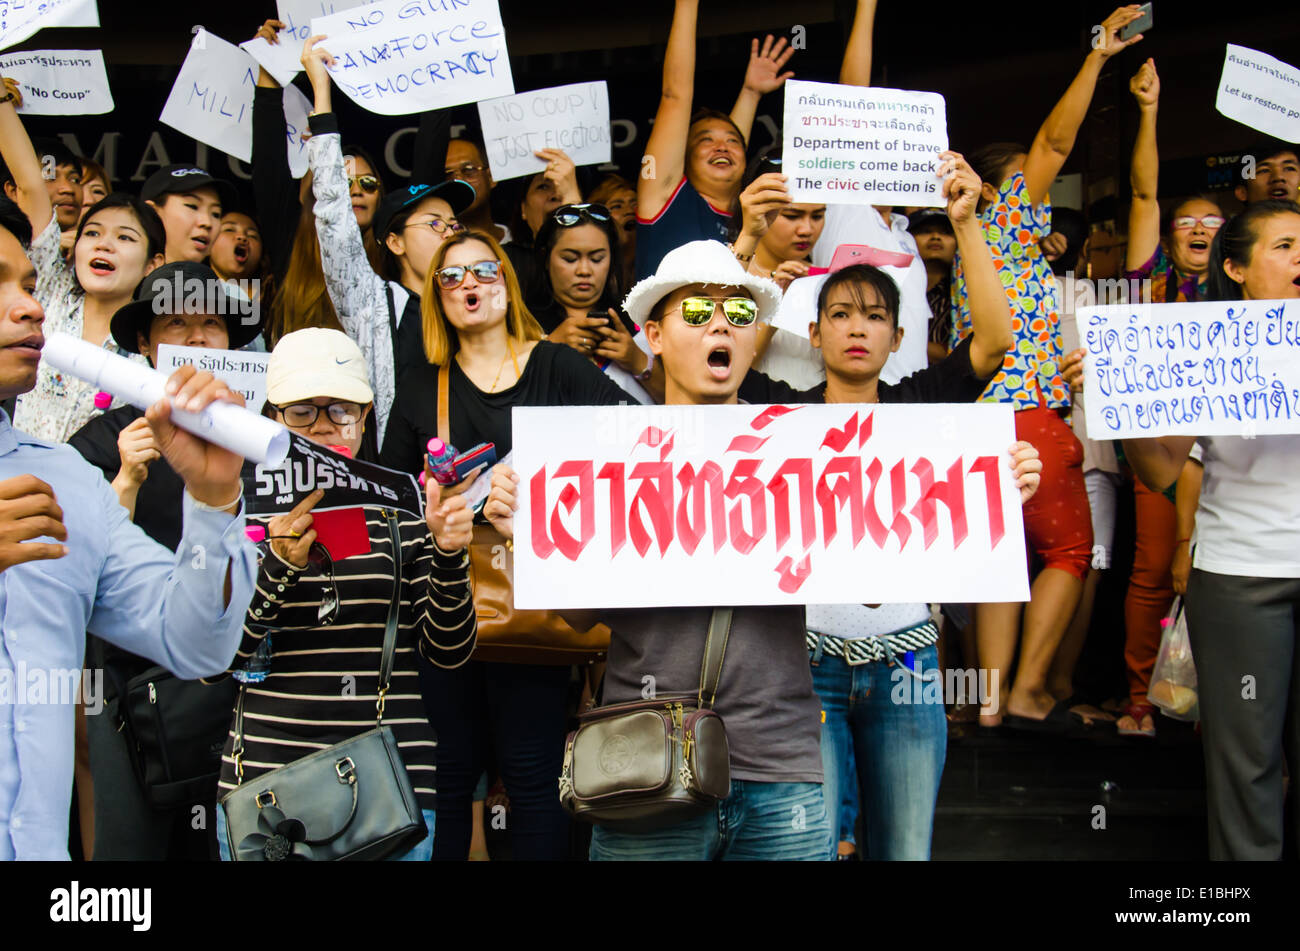 People whom want democracy gathered was against the military coup. Stock Photo